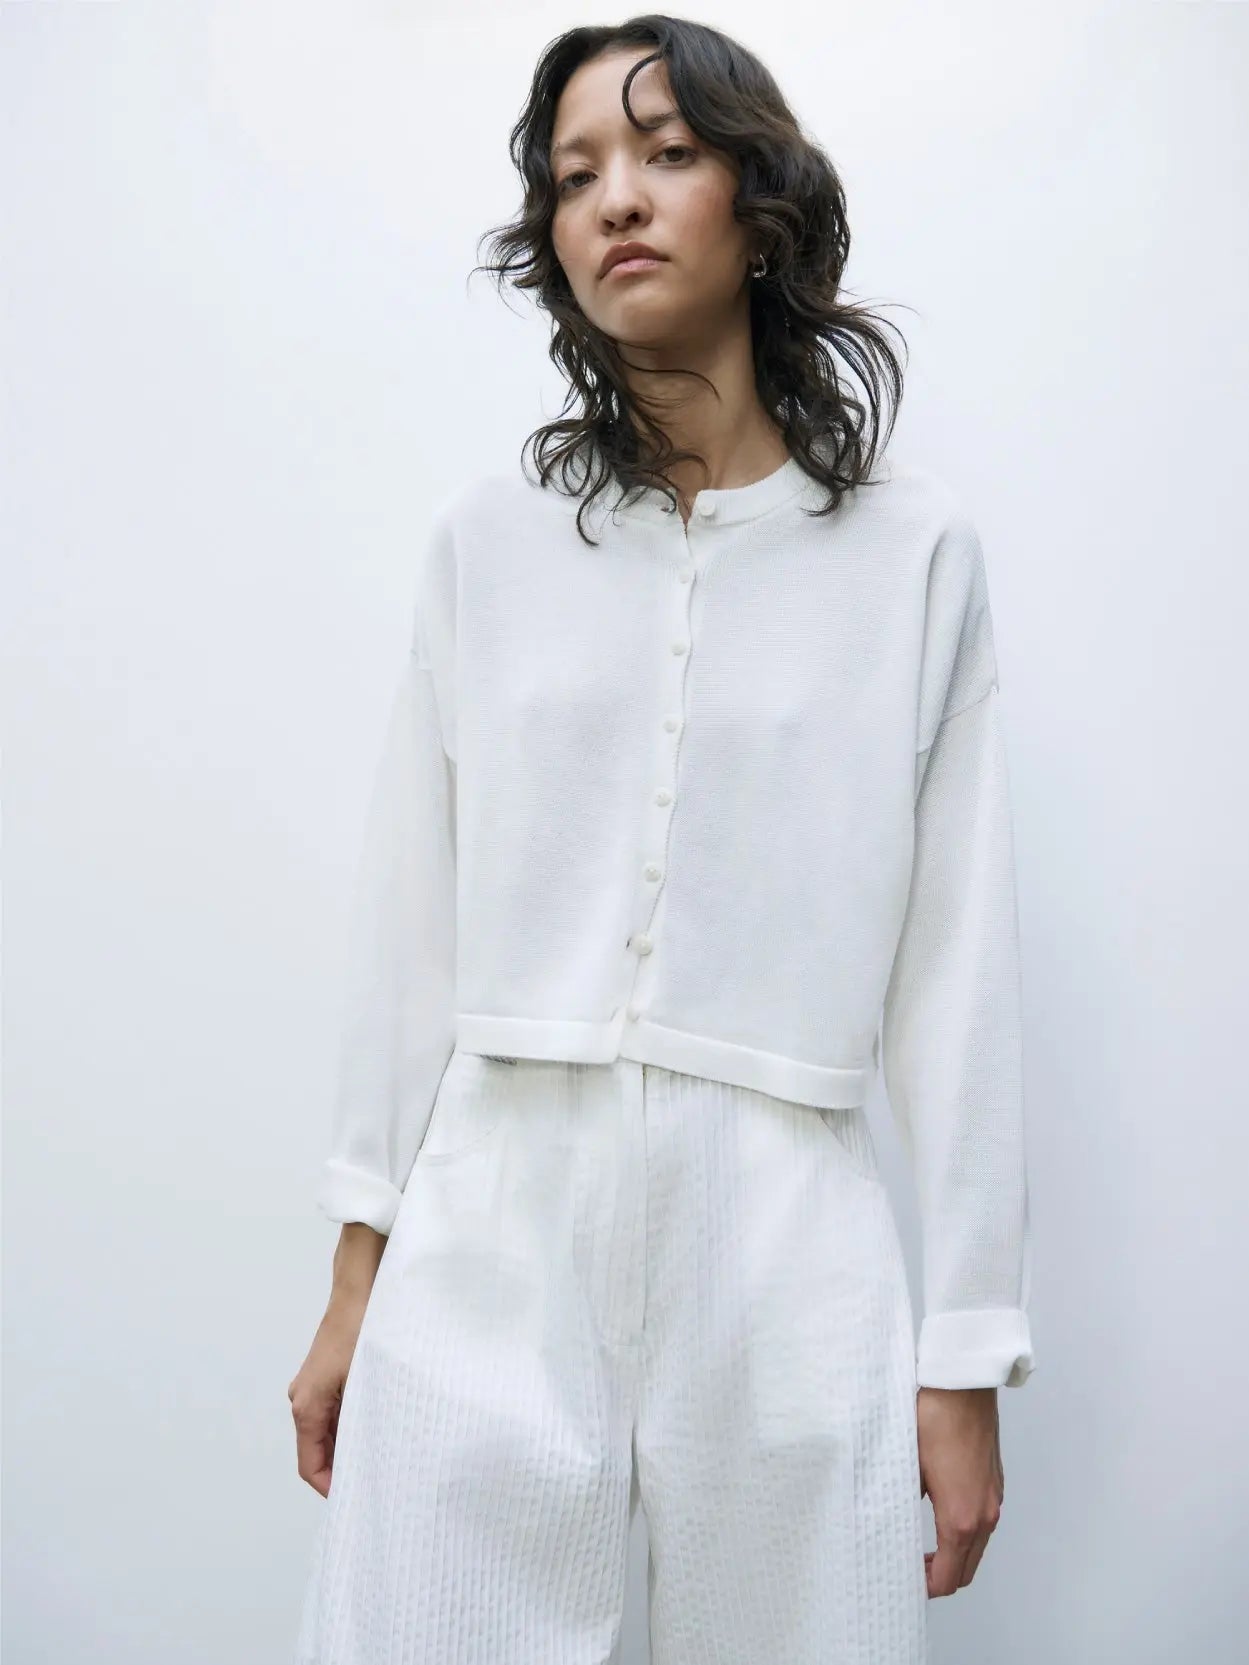 A white, long-sleeved, cropped cardigan with buttons down the front from Cordera. The Cotton Cropped Cardigan White has a simple, minimalist design with a round neckline and ribbed cuffs at the sleeves. The fabric appears soft and lightweight against a plain white background.